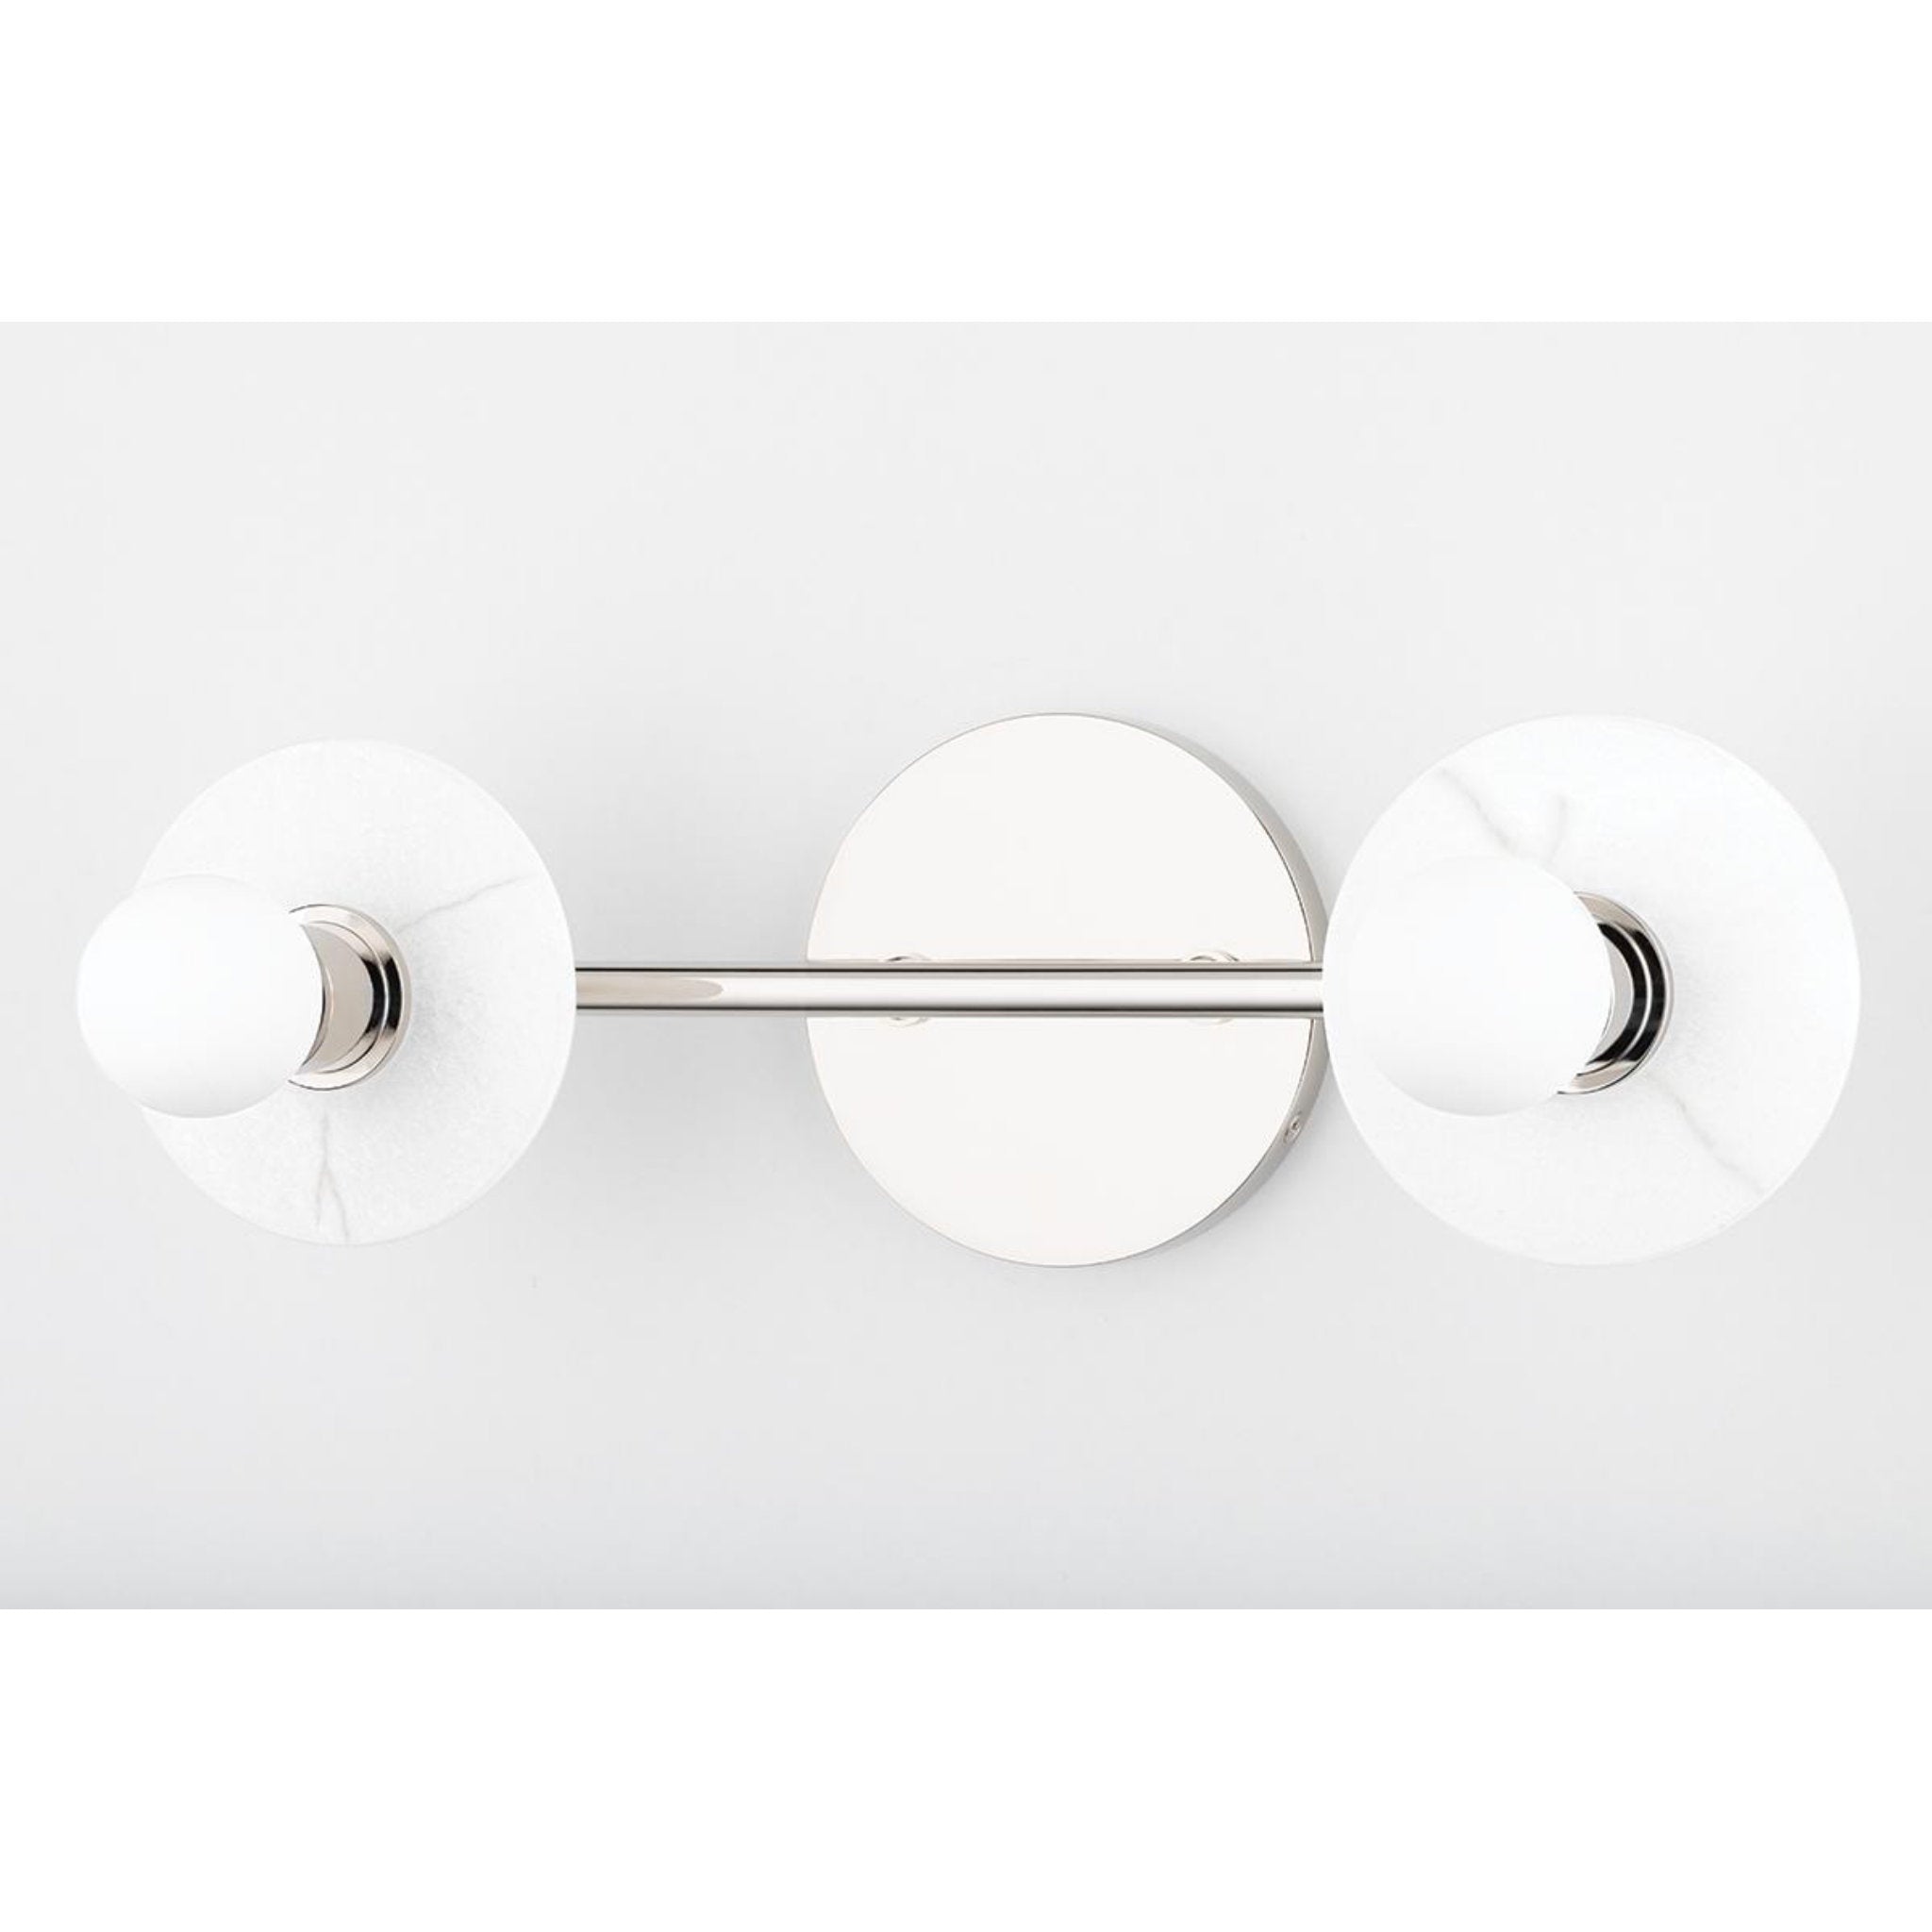 Elmont 6 Light Bath and Vanity in Polished Nickel